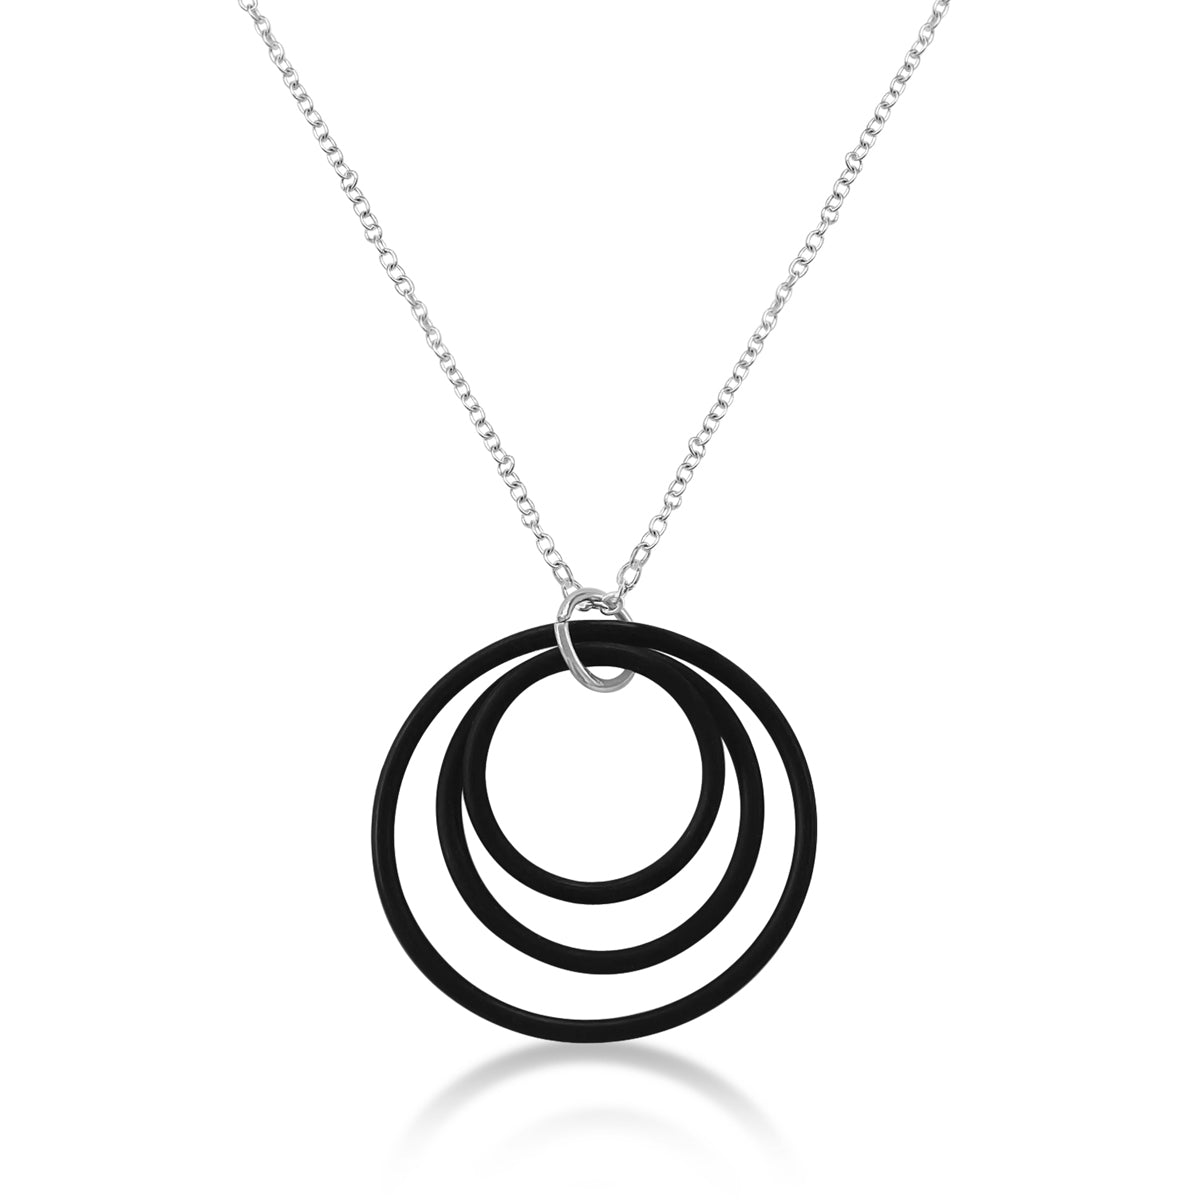 Zero Waste Necklace for Conscious Eco Living from recycled scuba gear